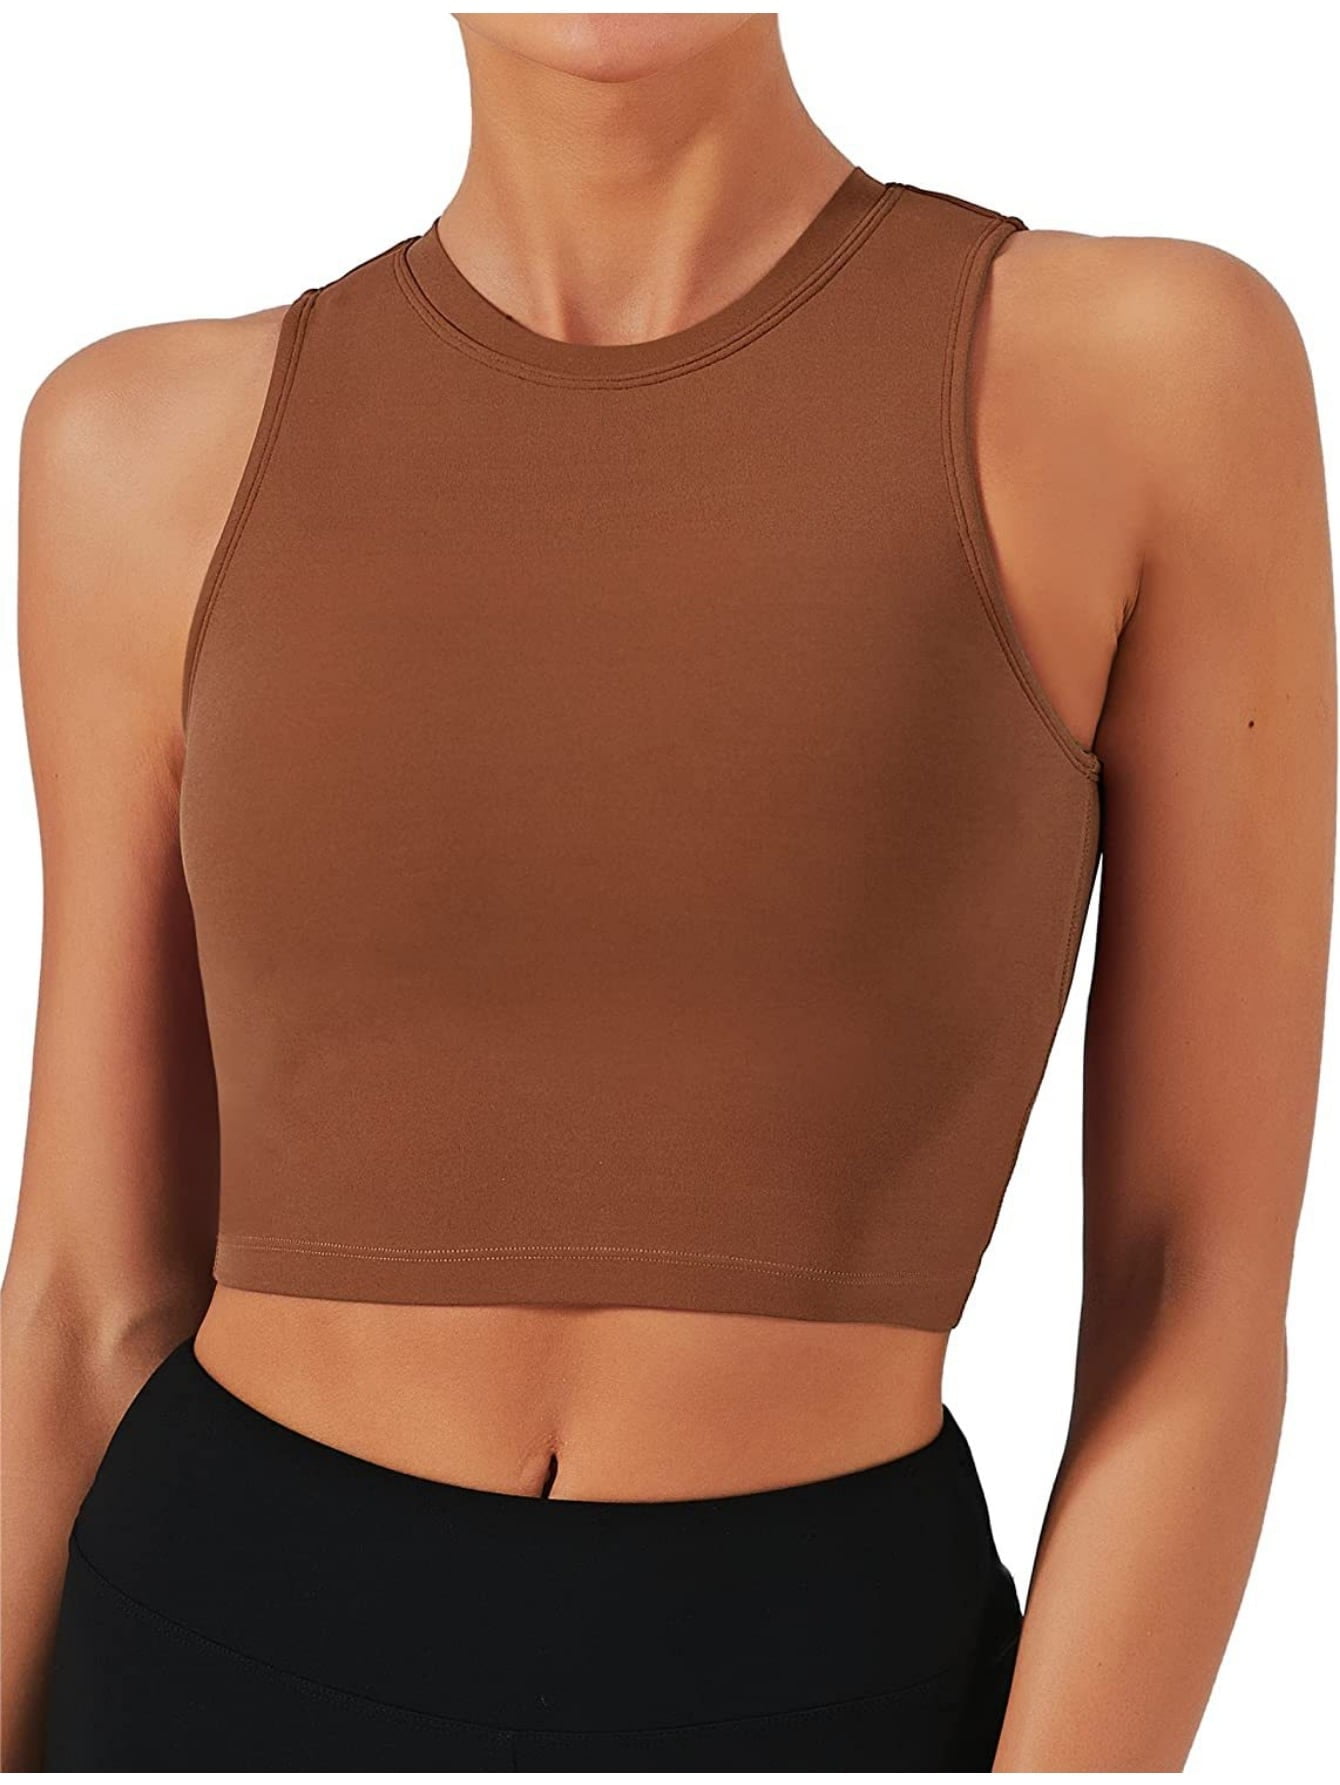 Natural Feelings Sports Bras for Women Removable Padded Yoga Tank Tops  Sleeveless Fitness Workout Running Crop Tops Coffee Brown